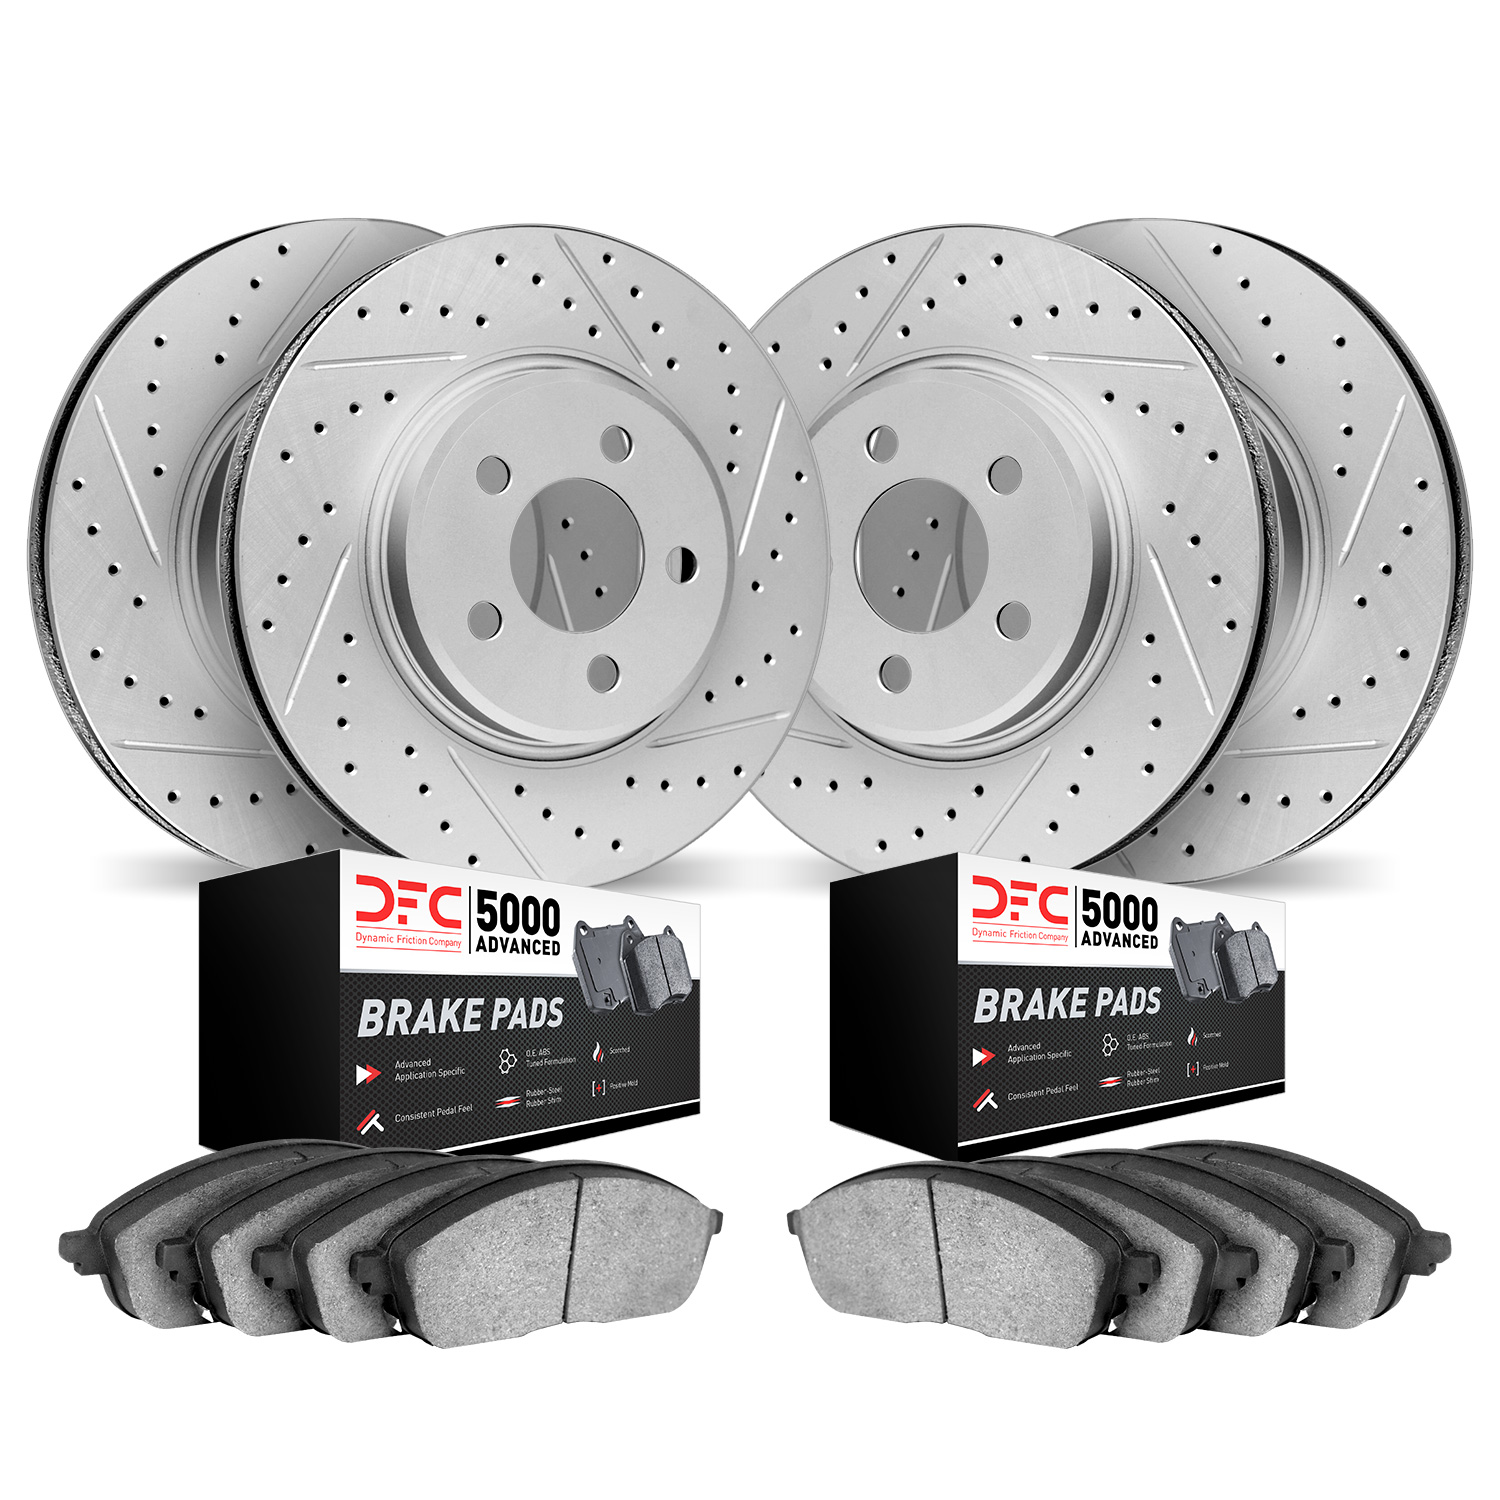 2504-40095 Geoperformance Drilled/Slotted Rotors w/5000 Advanced Brake Pads Kit, 2006-2018 Mopar, Position: Front and Rear